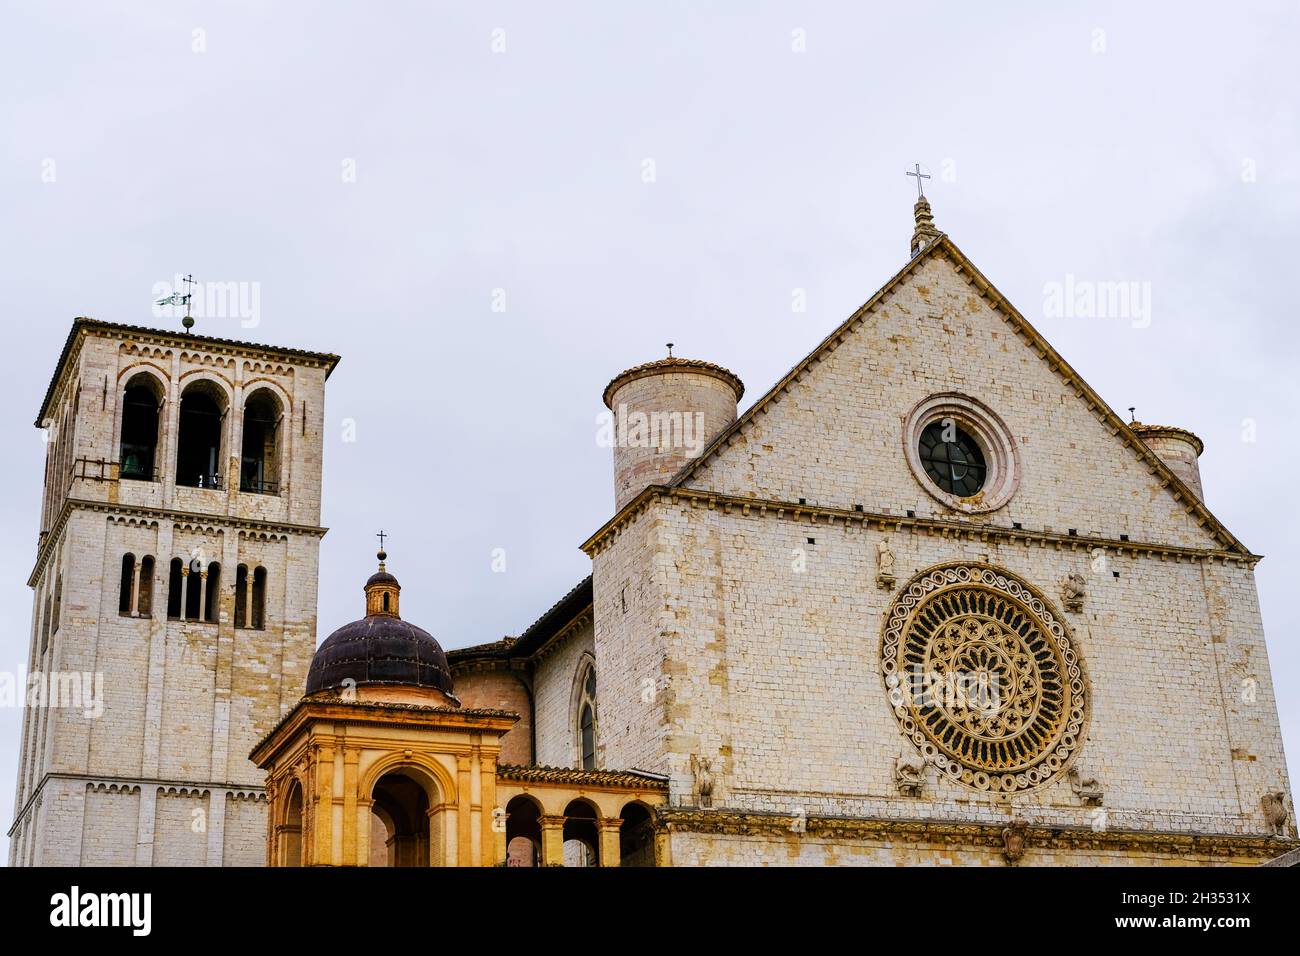 The facade of the upper church the Basilica of Saint Francis of Assisi Stock Photo